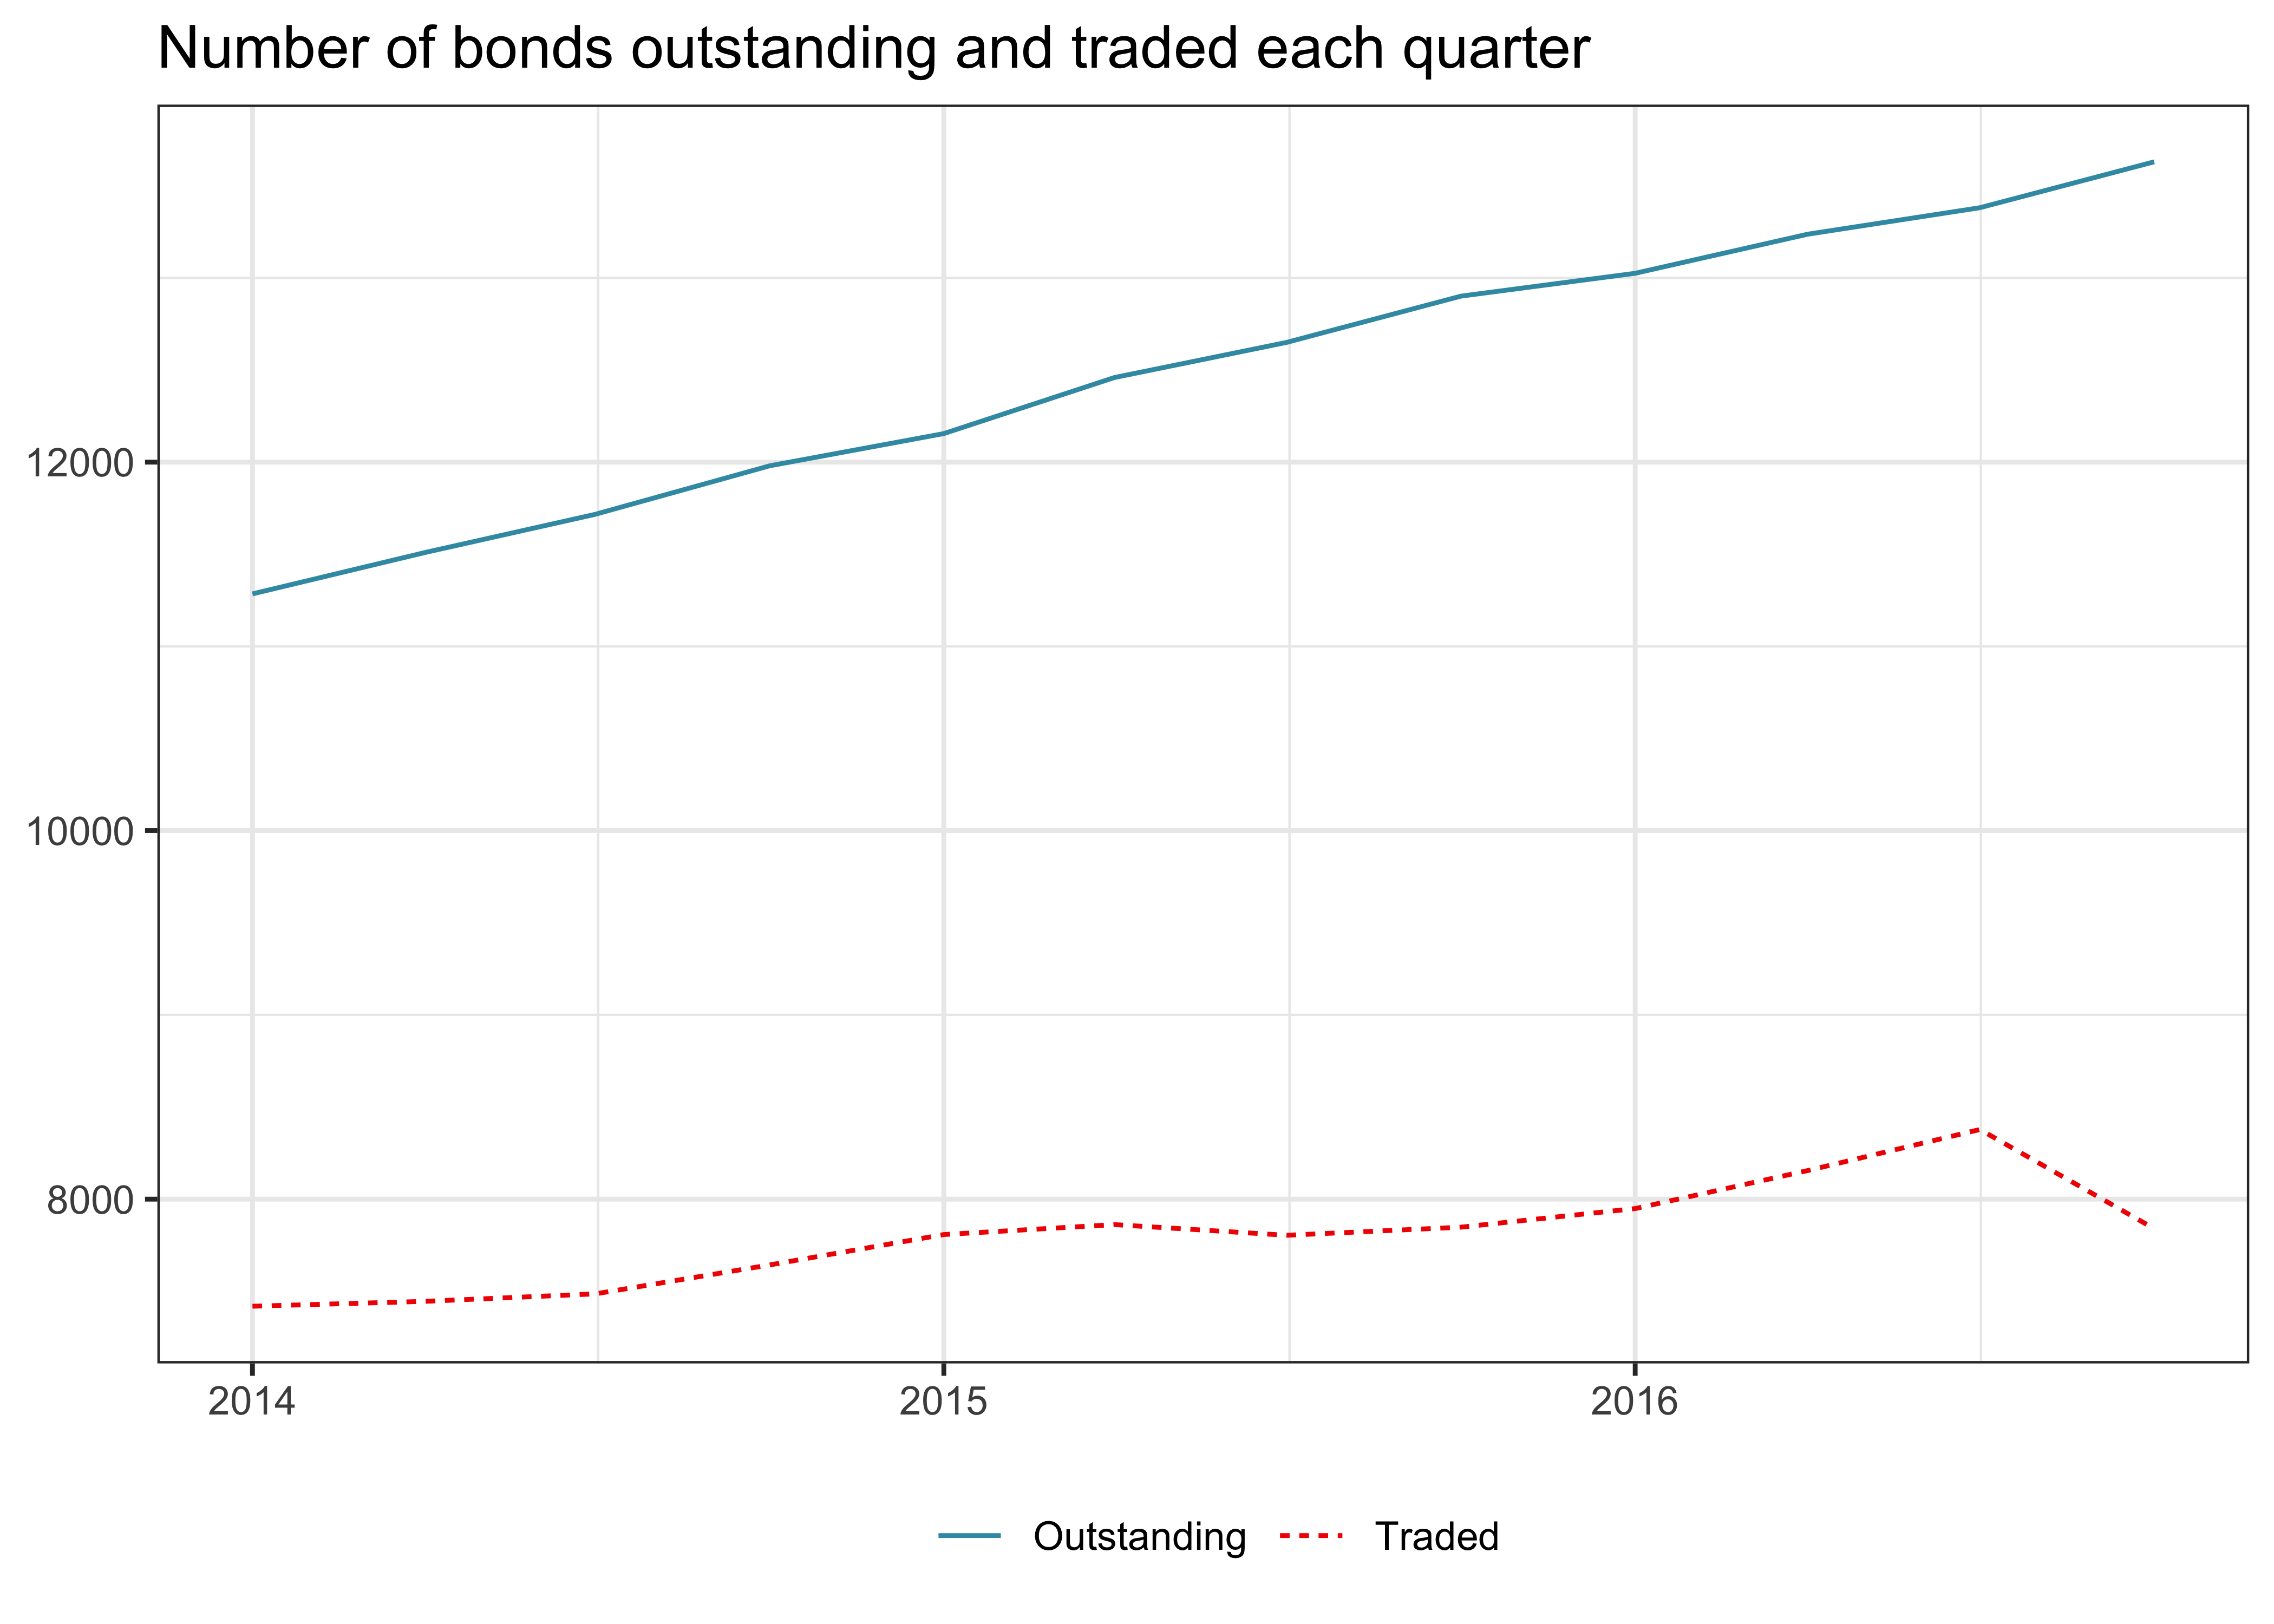 Title: Number of bonds outstanding and traded each quarter. The figure shows a time series of outstanding bonds and bonds traded. The amount outstanding increases monotonically between 2014 and 2016. The number of bonds traded represents only a fraction of roughly 60 percent, which peaks around the third quarter of 2016.